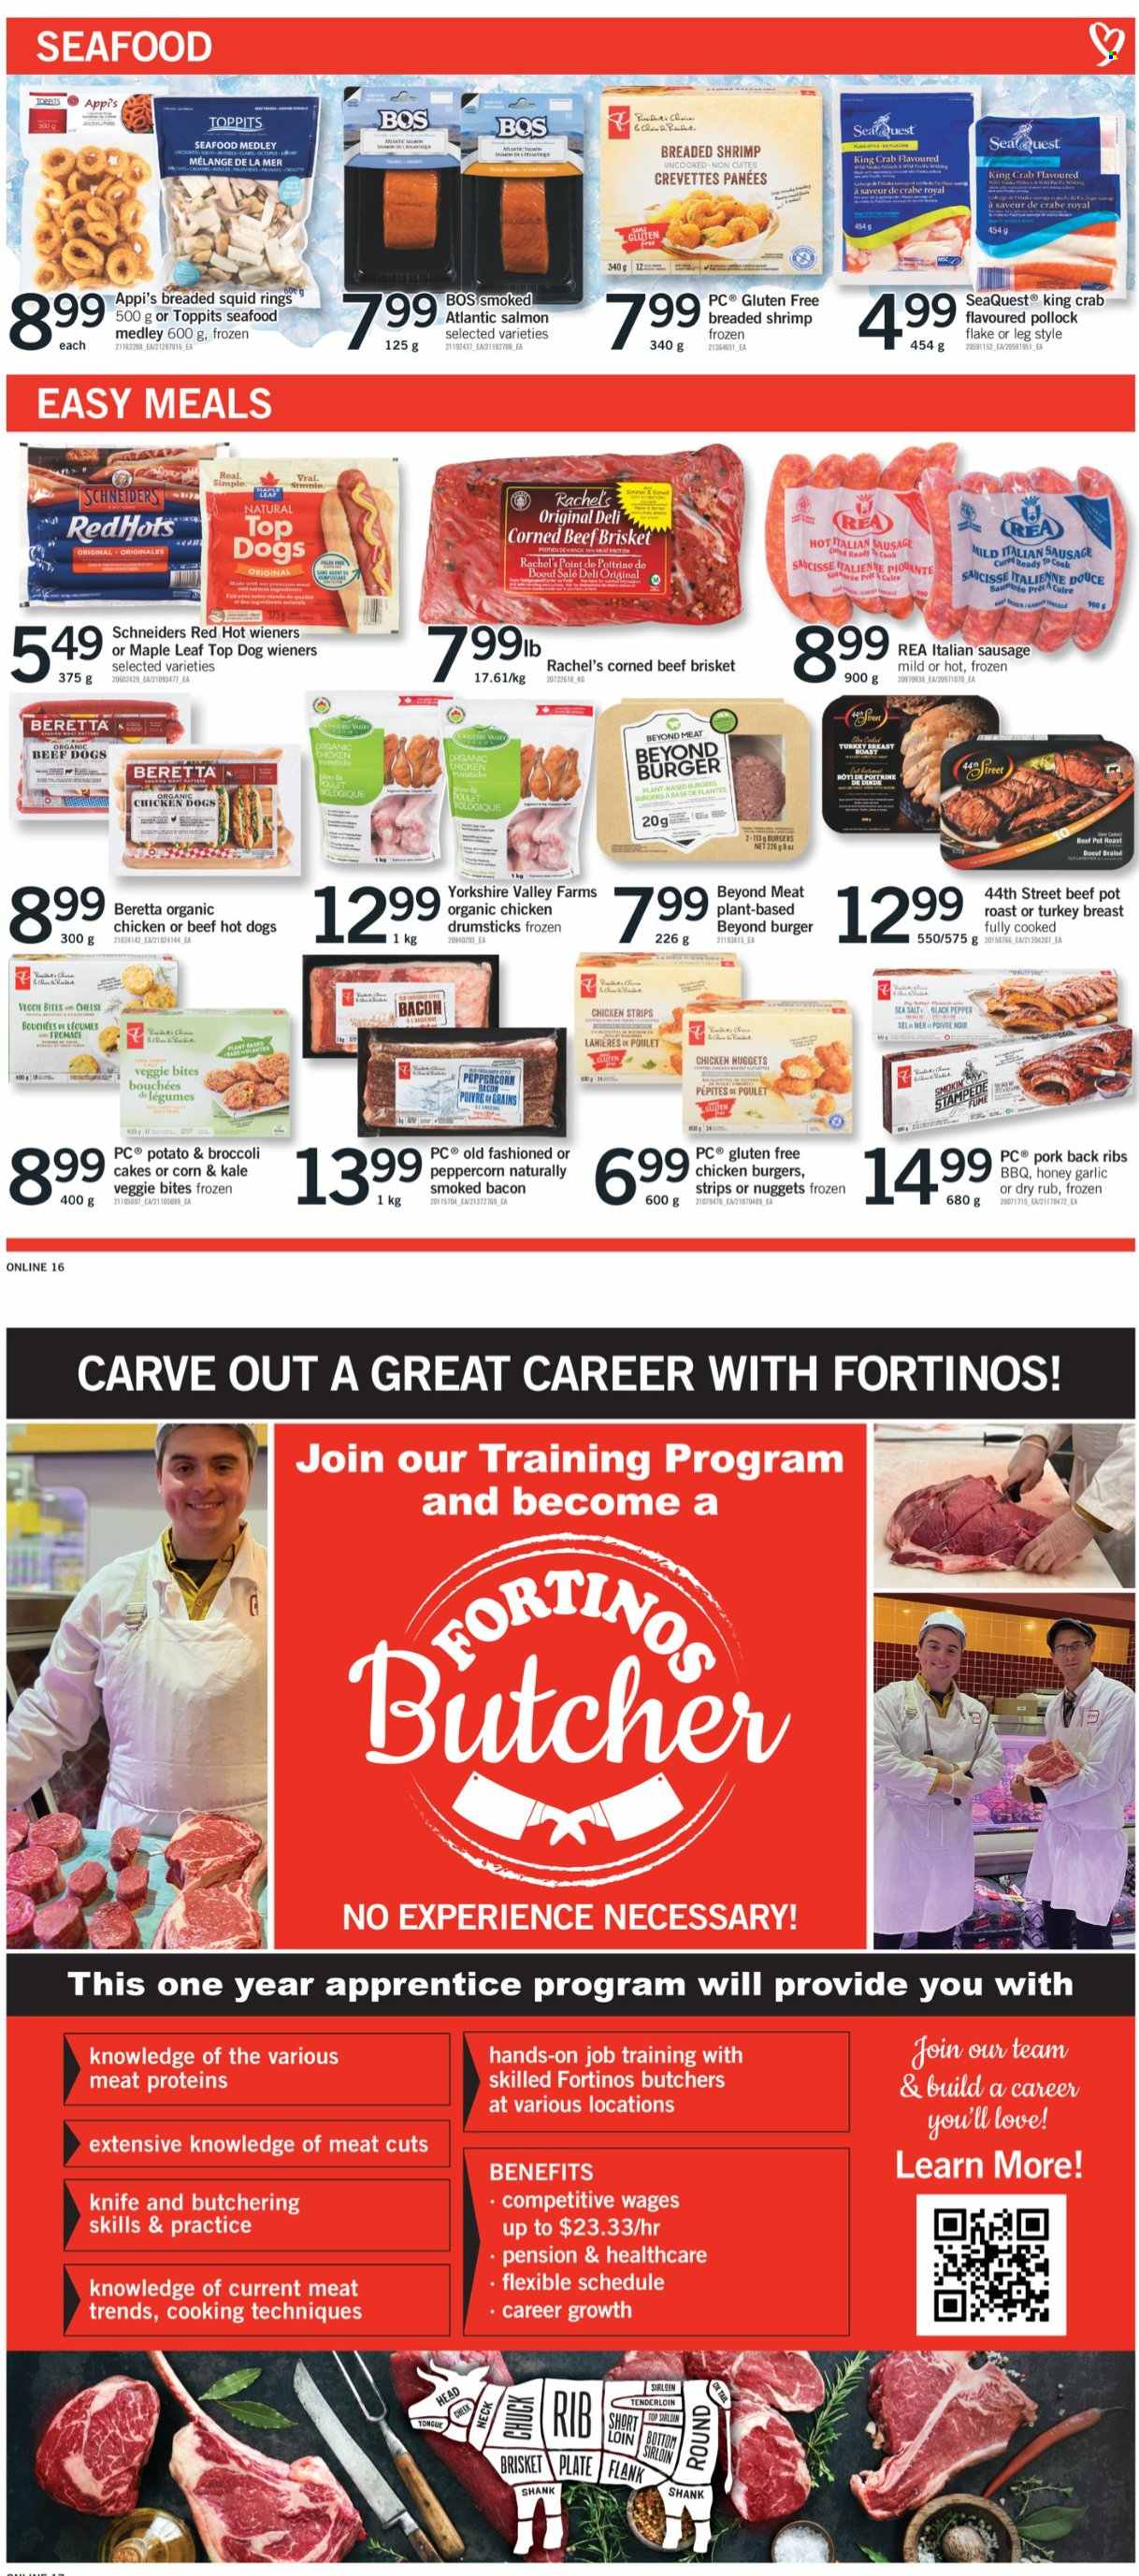 thumbnail - Fortinos Flyer - October 21, 2021 - October 27, 2021 - Sales products - cake, broccoli, corn, garlic, salmon, squid, king crab, pollock, seafood, crab, shrimps, squid rings, hot dog, nuggets, hamburger, bacon, sausage, italian sausage, corned beef, cheese, strips, chicken strips, sea salt, black pepper, honey, turkey breast, chicken drumsticks, chicken, turkey, beef meat, beef brisket, pork meat, pork ribs, pork back ribs, knife, plate, pot. Page 8.